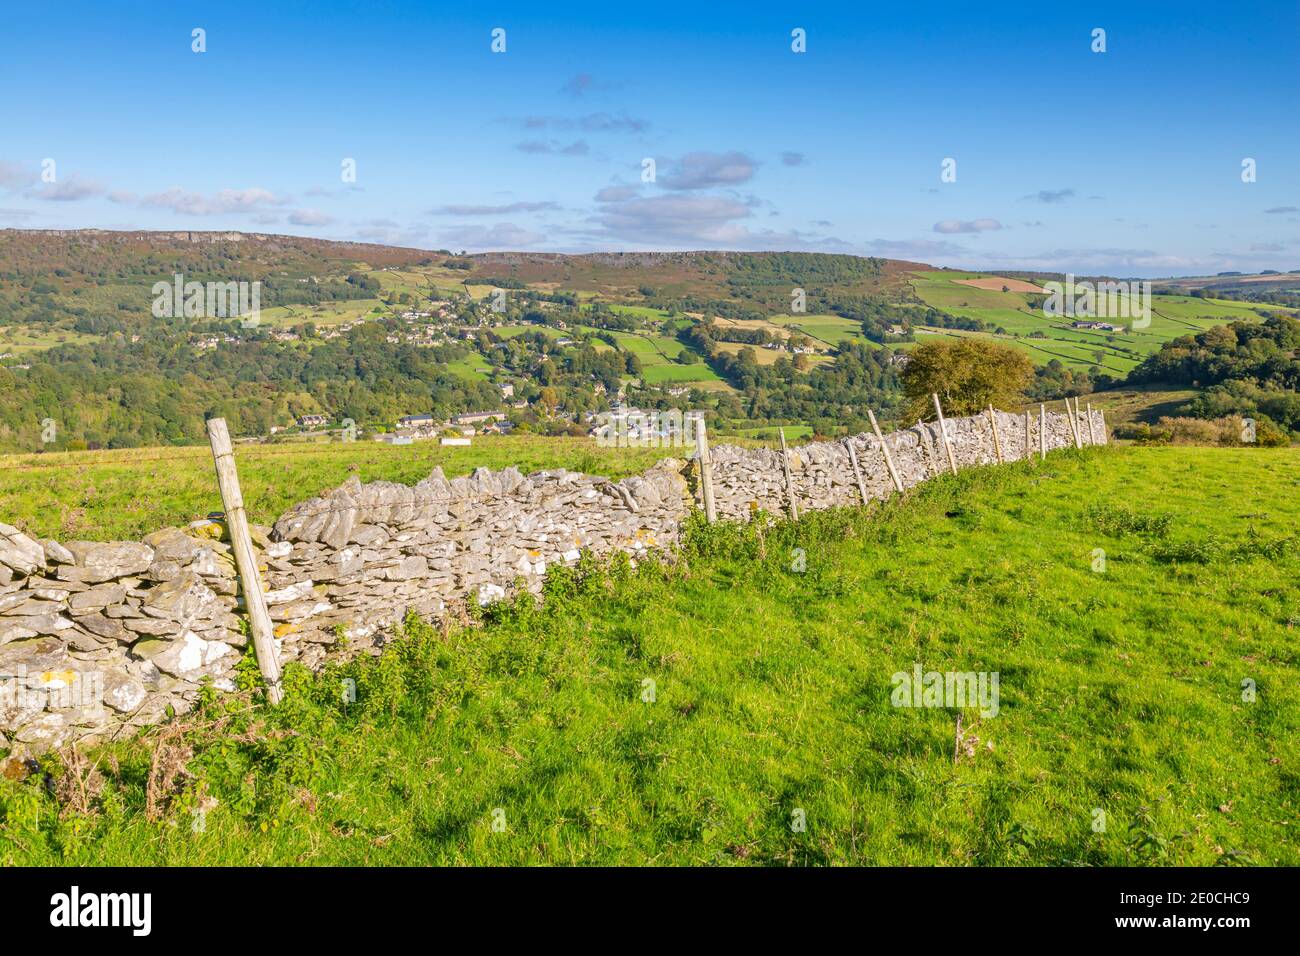 View of dry stone wall and Calver Village overlooked by Curbar Edge, Calver, Derbyshire Peak District, Derbyshire, England, United Kingdom, Europe Stock Photo